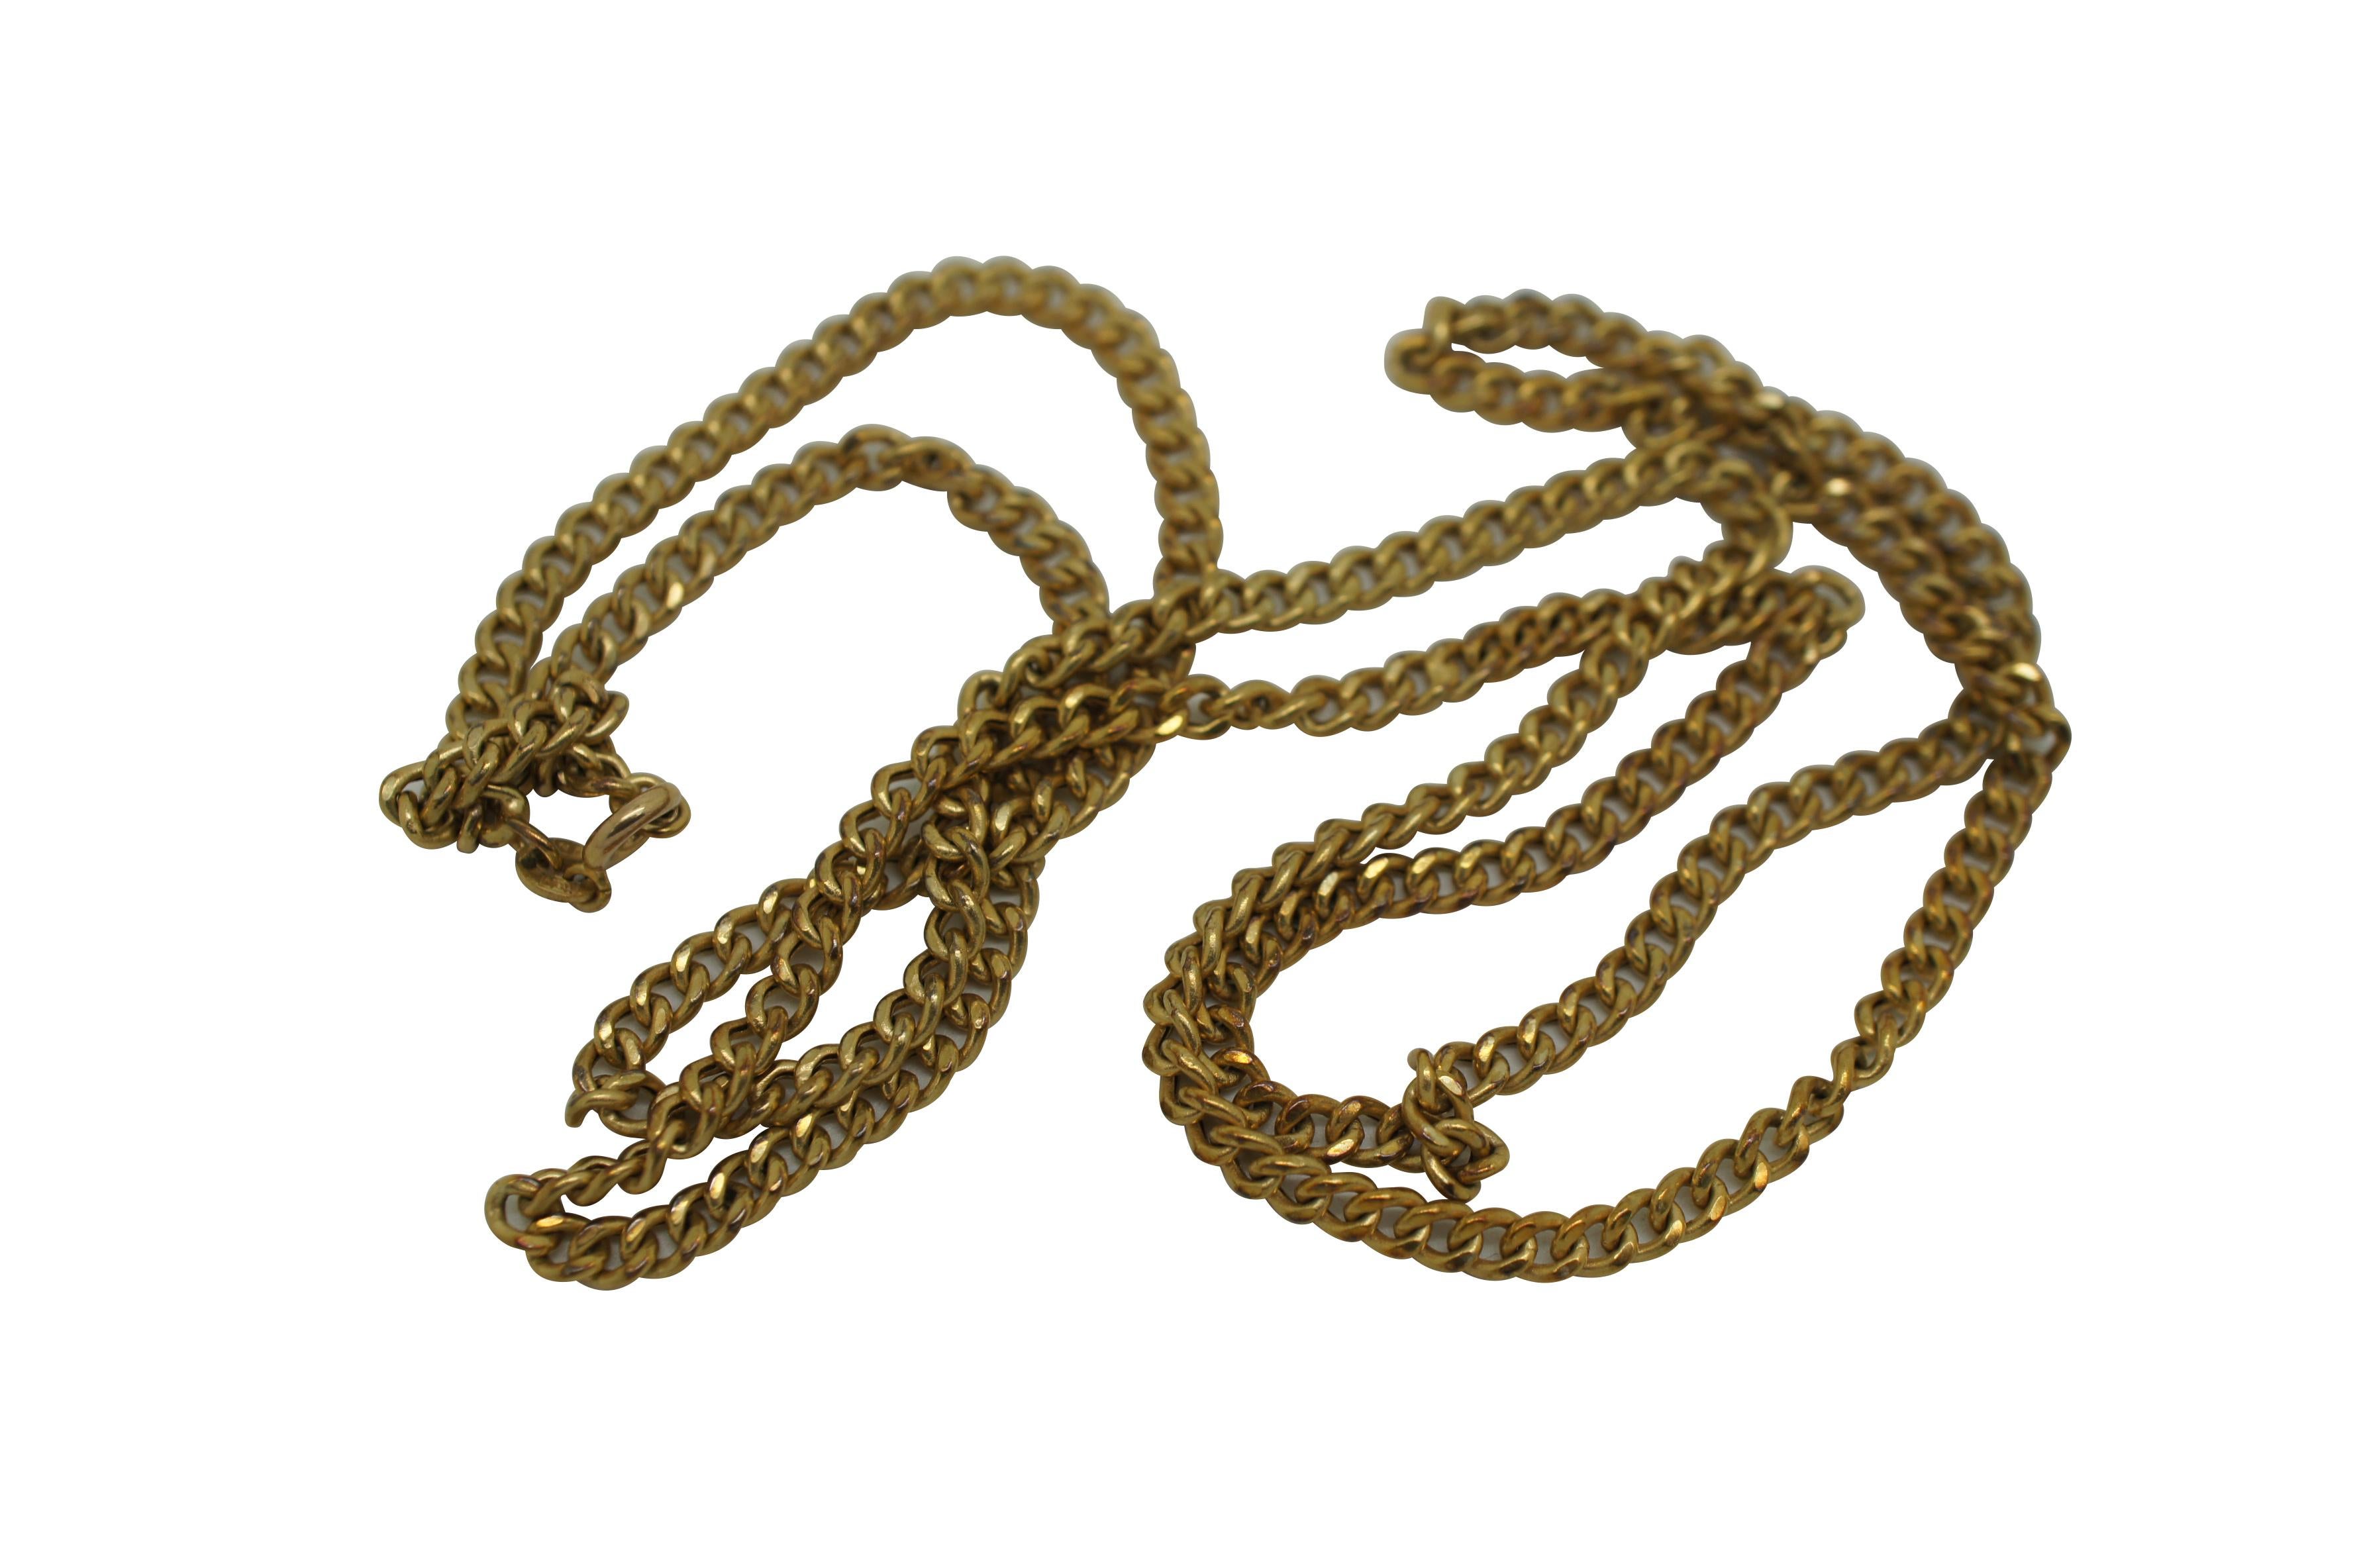 Vintage 14K / 585 yellow gold curb chain with spring ring clasp. Made in Italy.

Dimensions:
Chain Length - 30